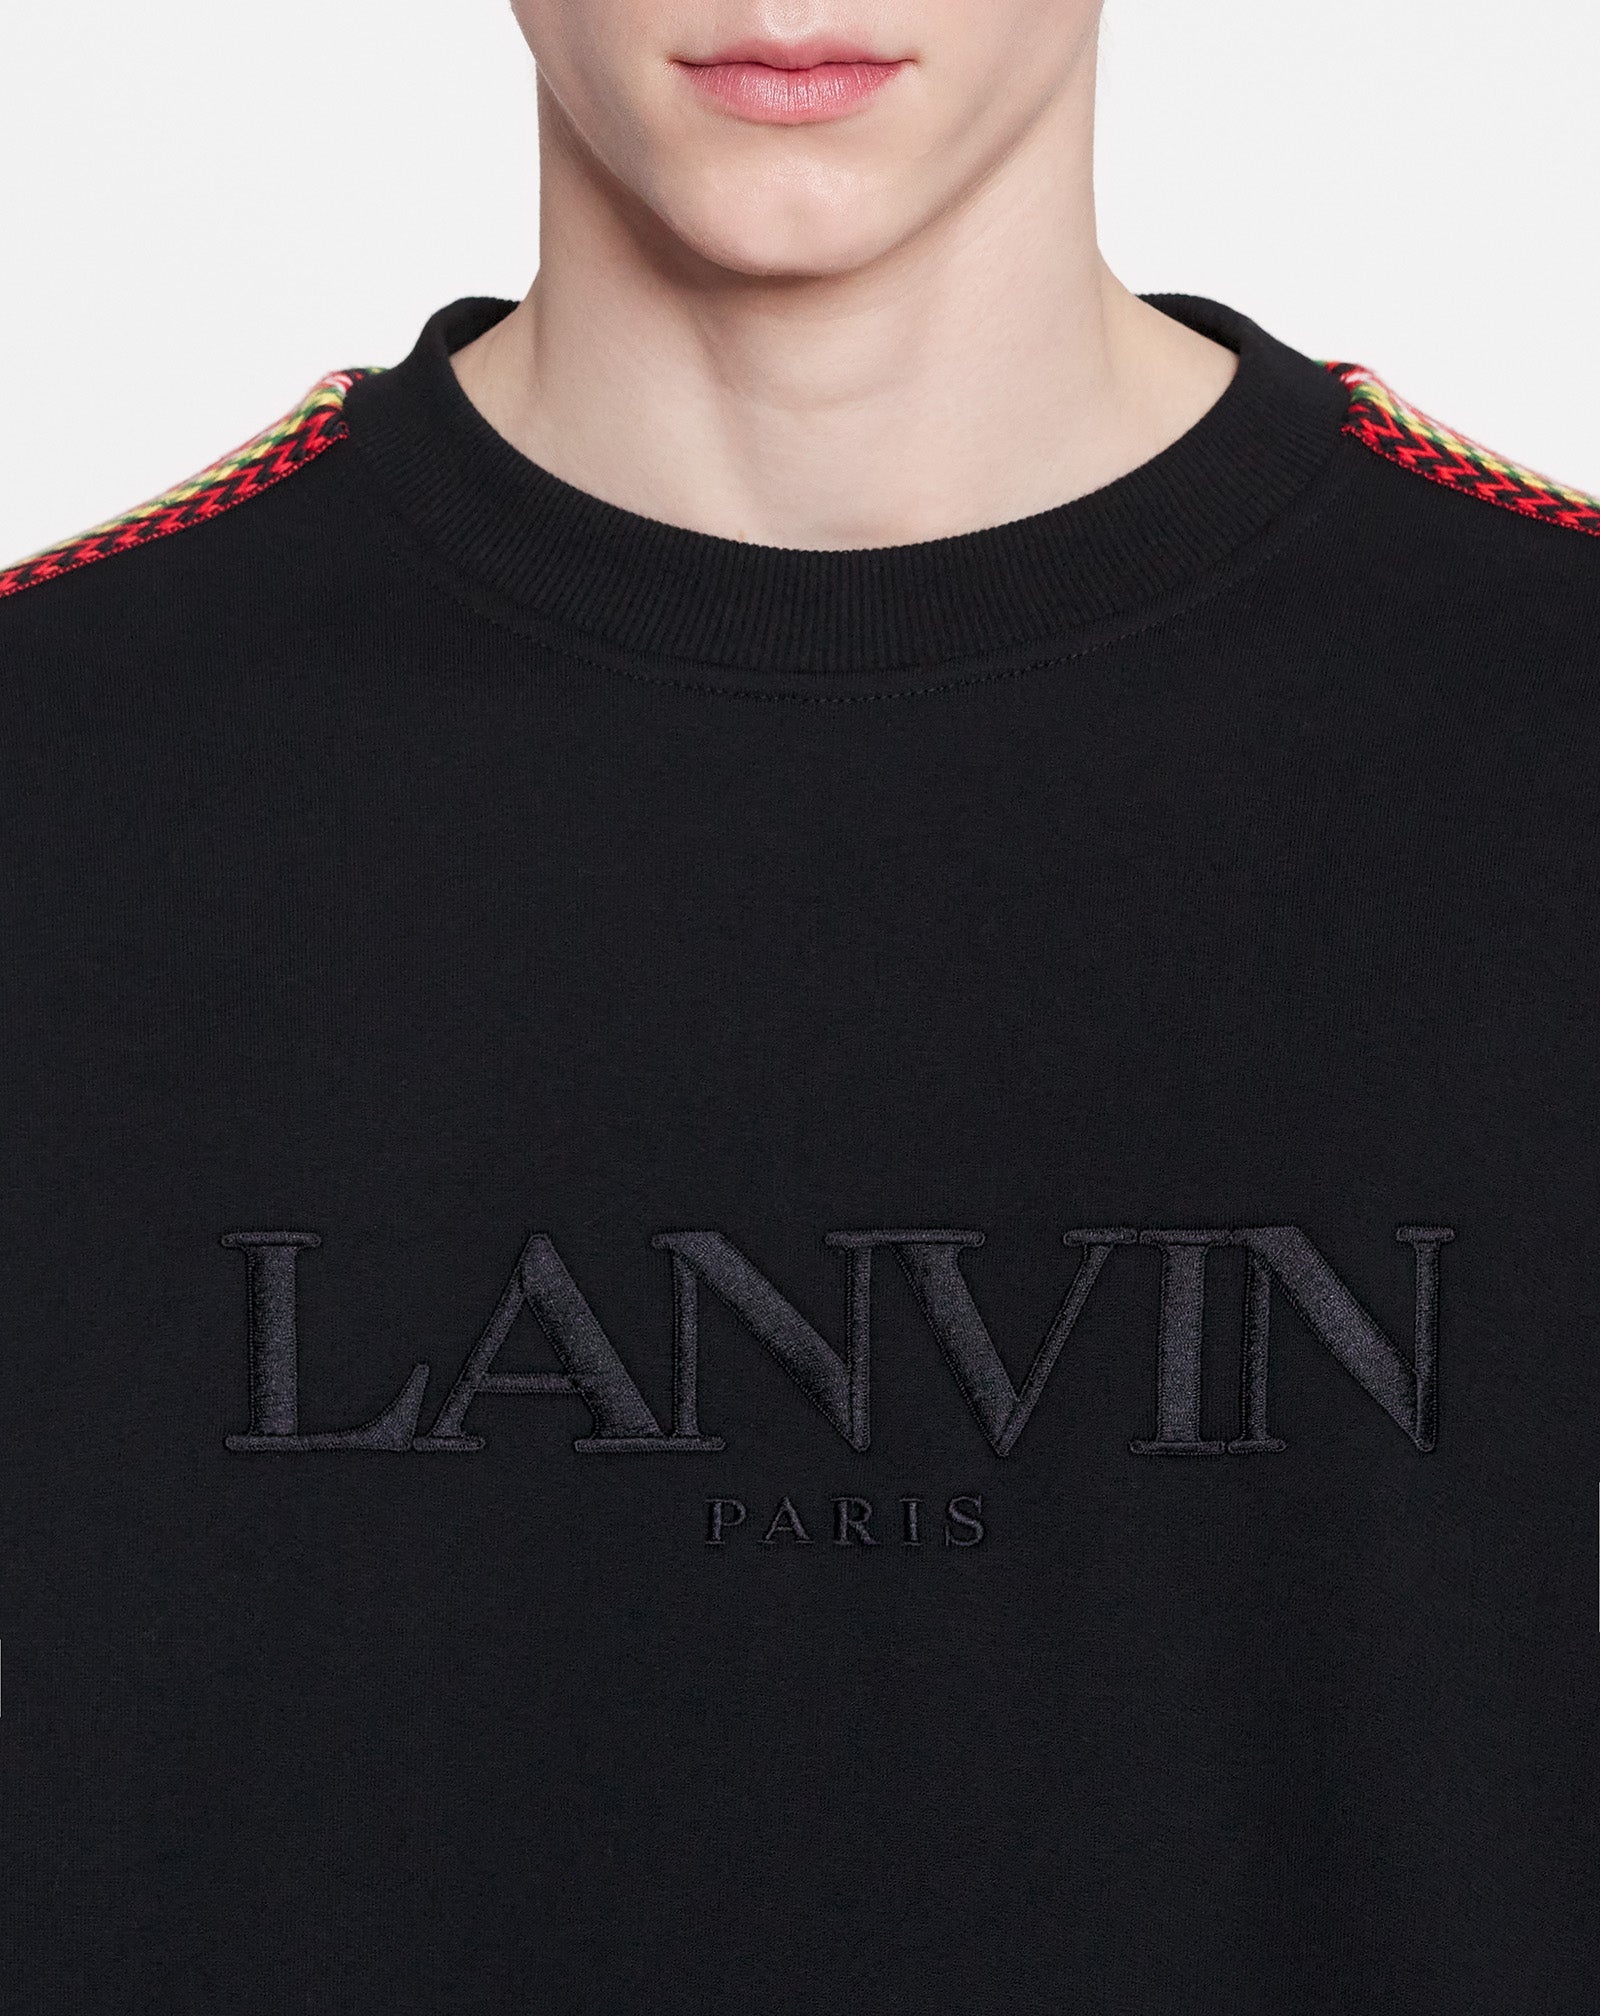 OVERSIZED LANVIN EMBROIDERED SIDE CURB SWEATSHIRT - 5